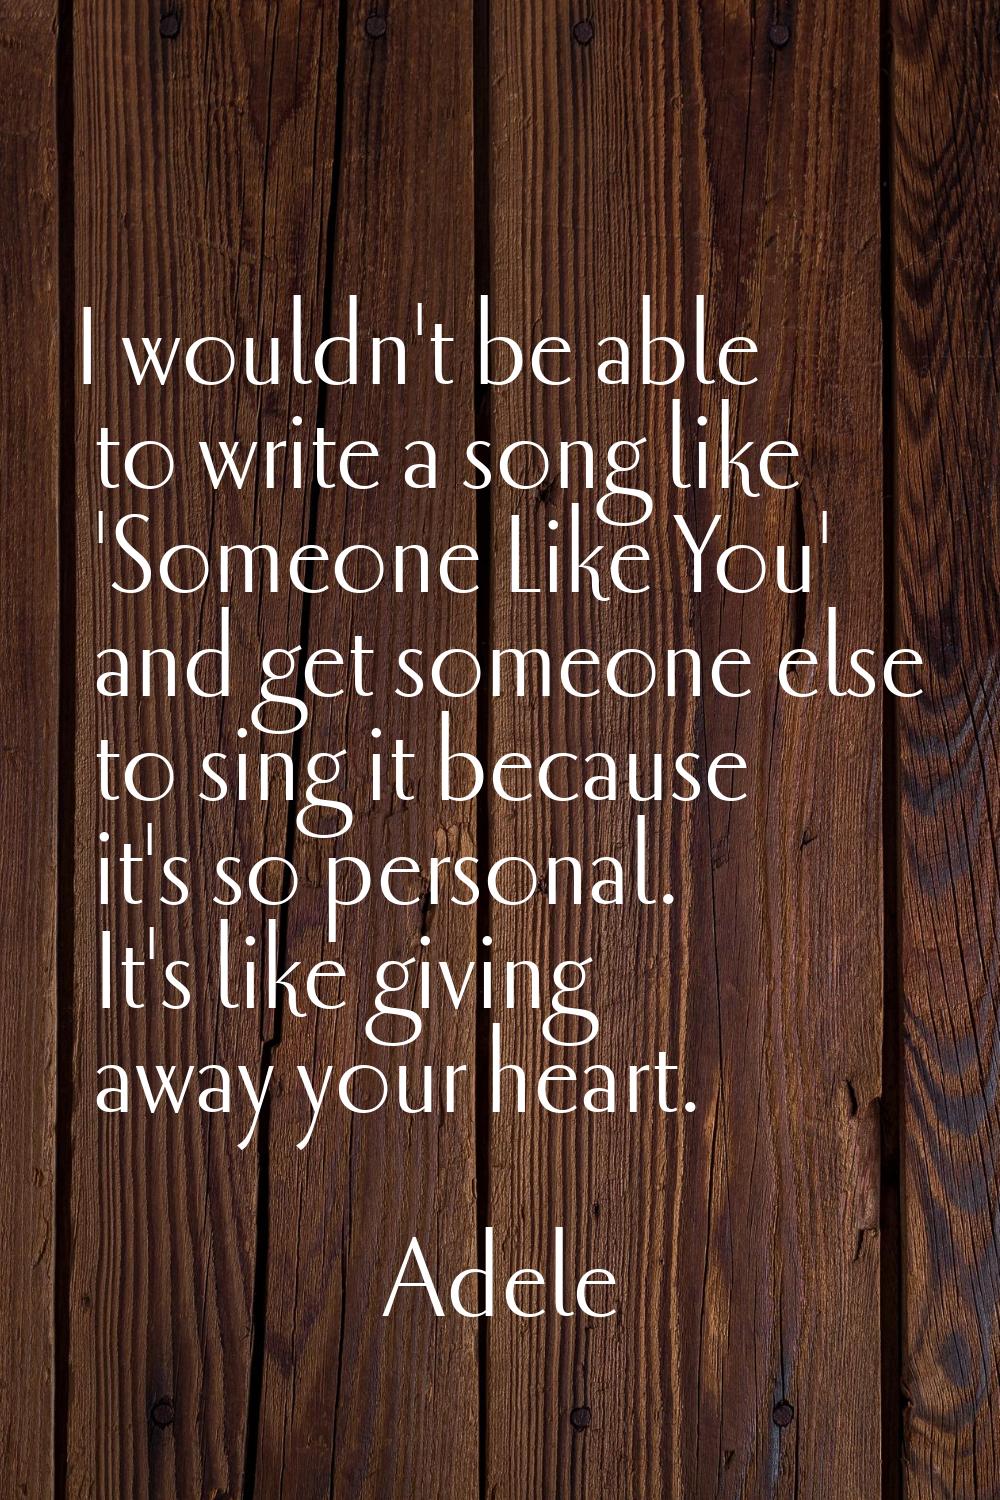 I wouldn't be able to write a song like 'Someone Like You' and get someone else to sing it because 